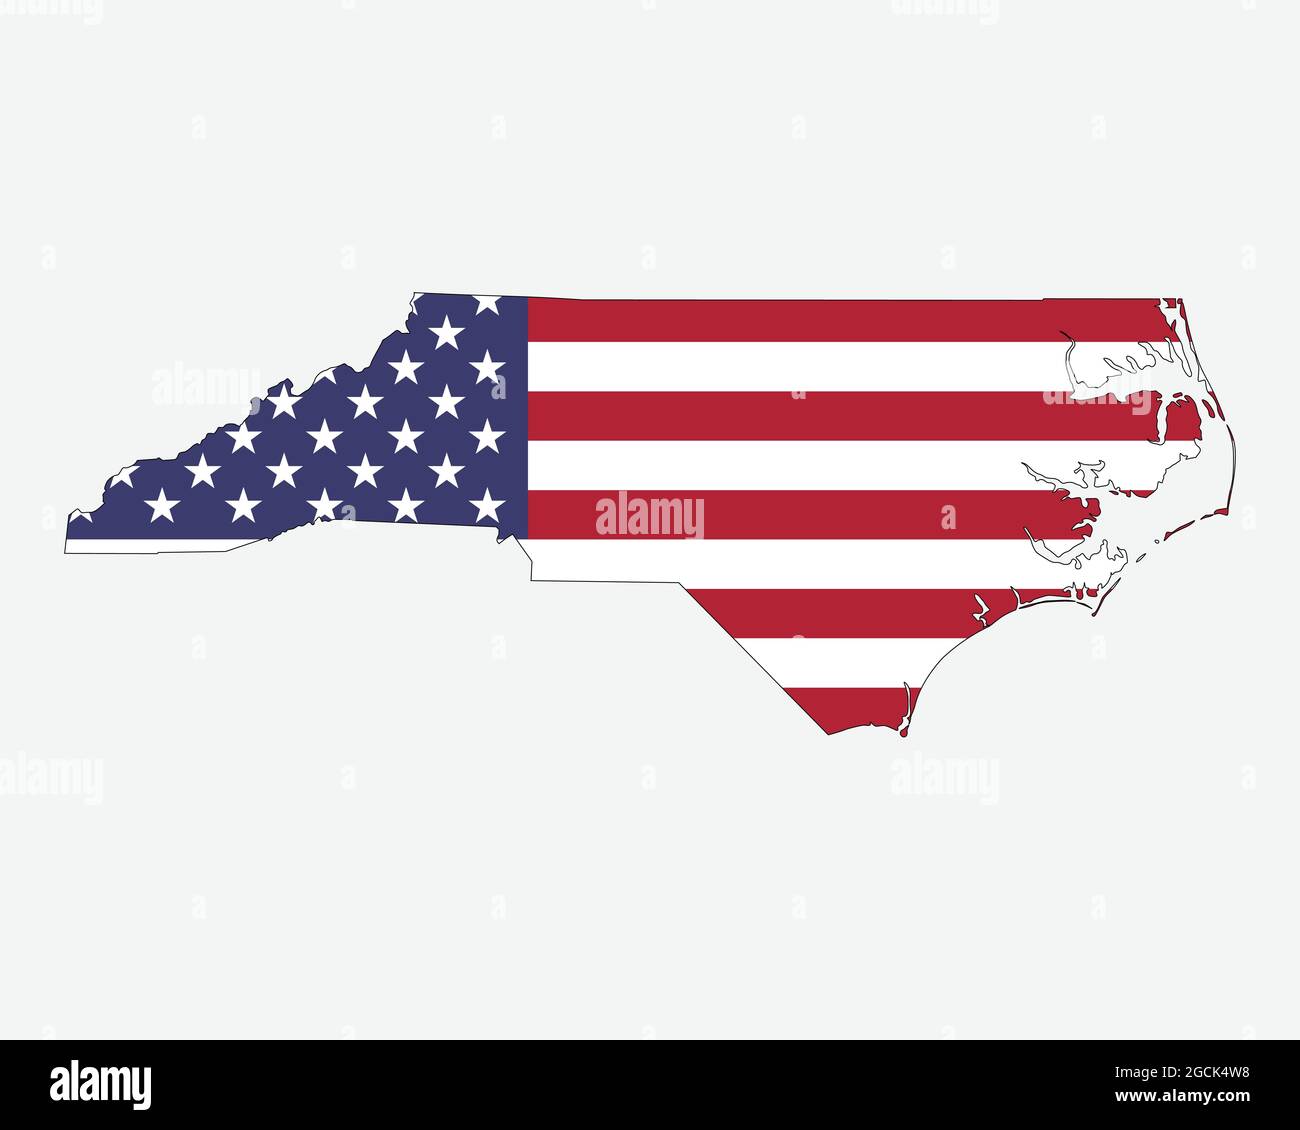 North Carolina Map on American Flag. NC, USA State Map on US Flag. EPS Vector Graphic Clipart Icon Stock Vector